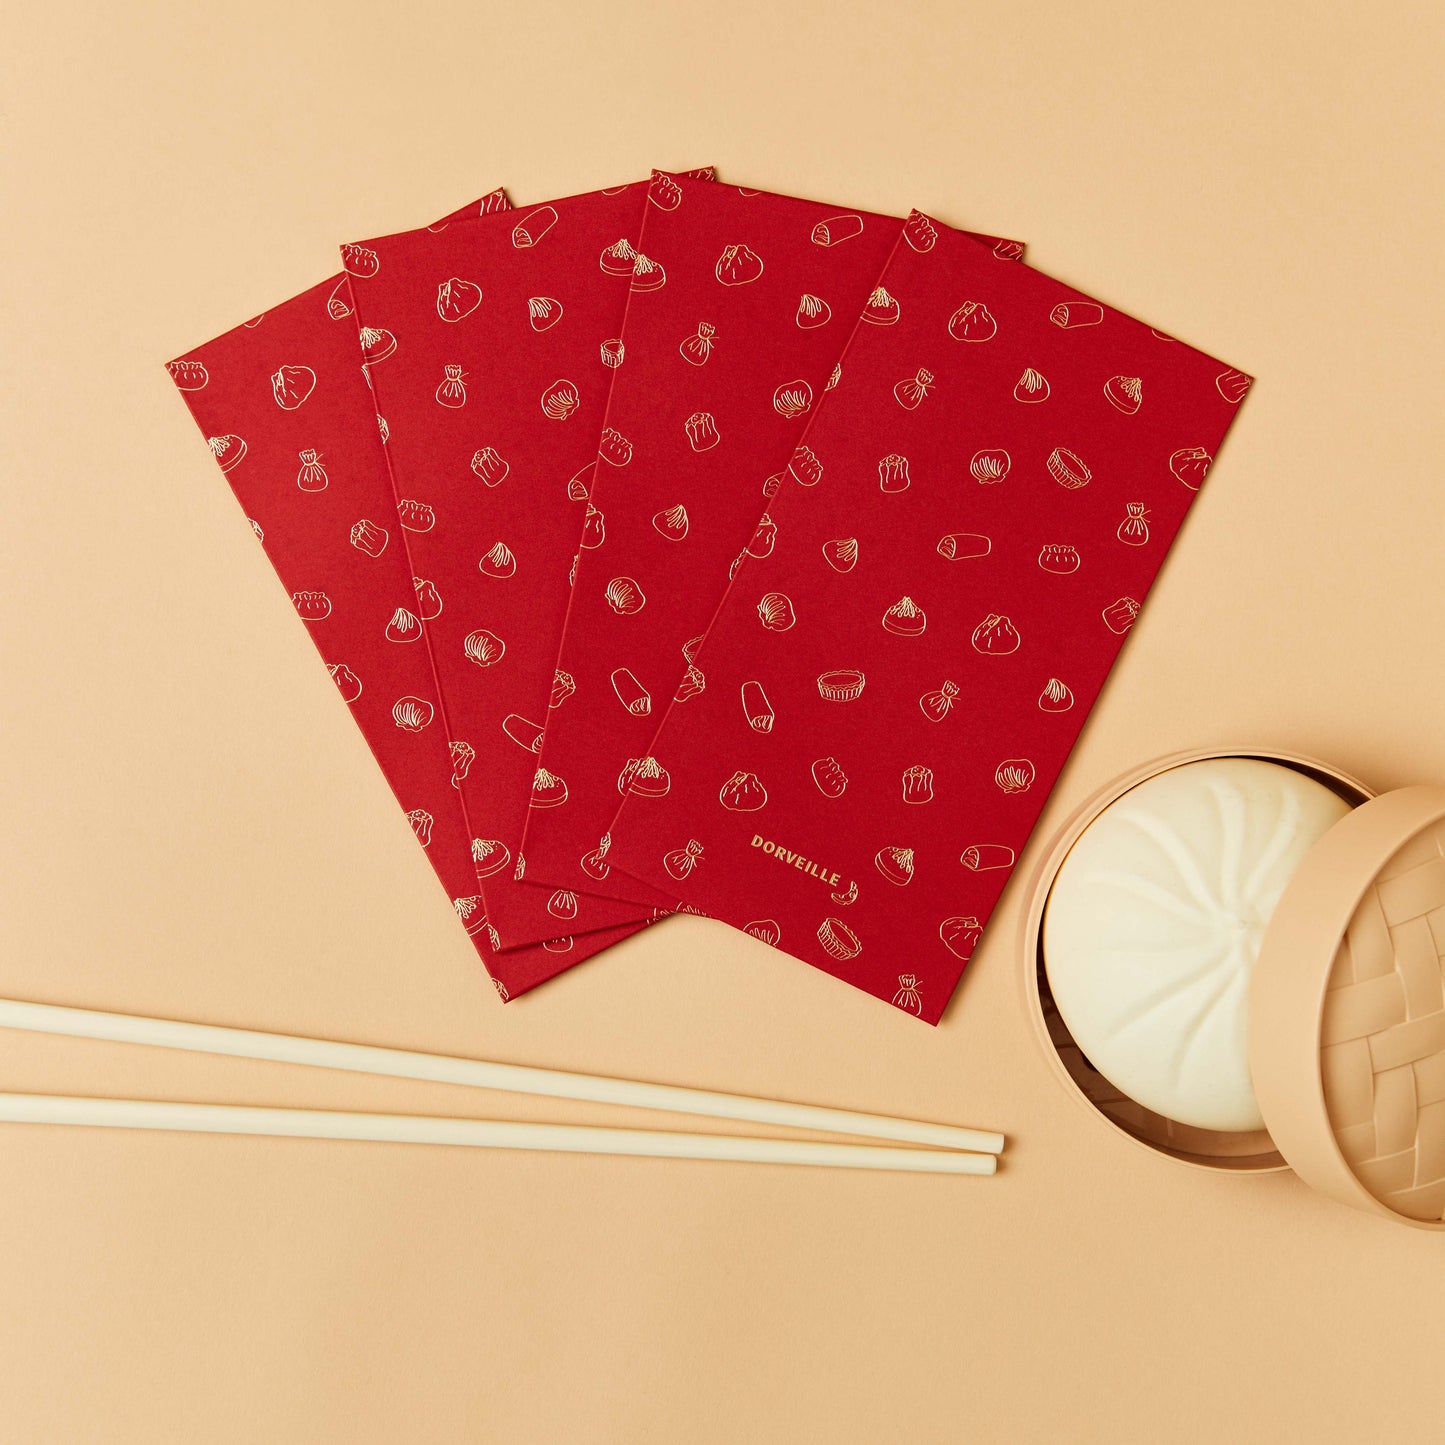 Lunar New Year Lucky Red Envelopes with Dim Sum print in gold foil. Decorations of a steamer bun and chopsticks